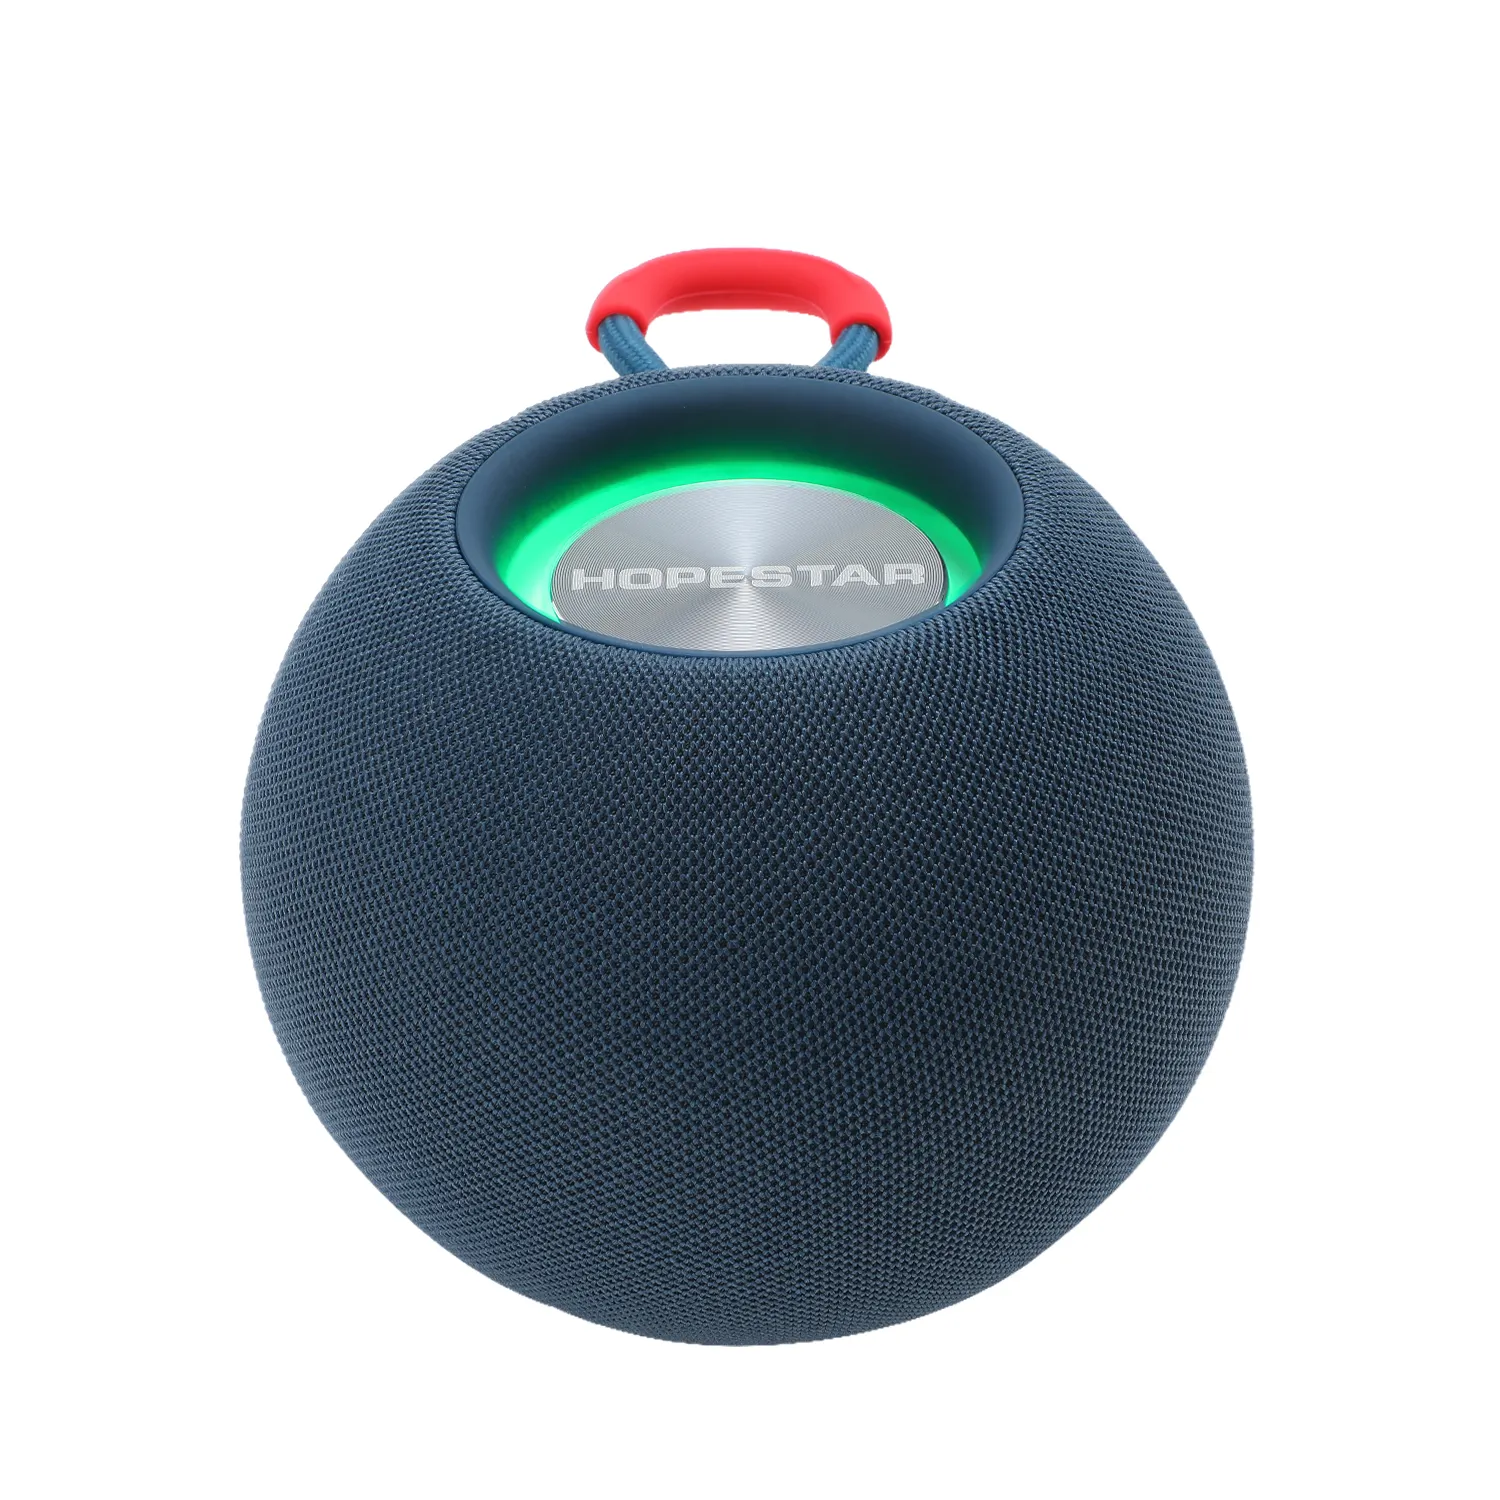 New Arrived circular Wireless Speaker Tumbler With Lid Outdoor Portable Sound Box Music Tumbler Player